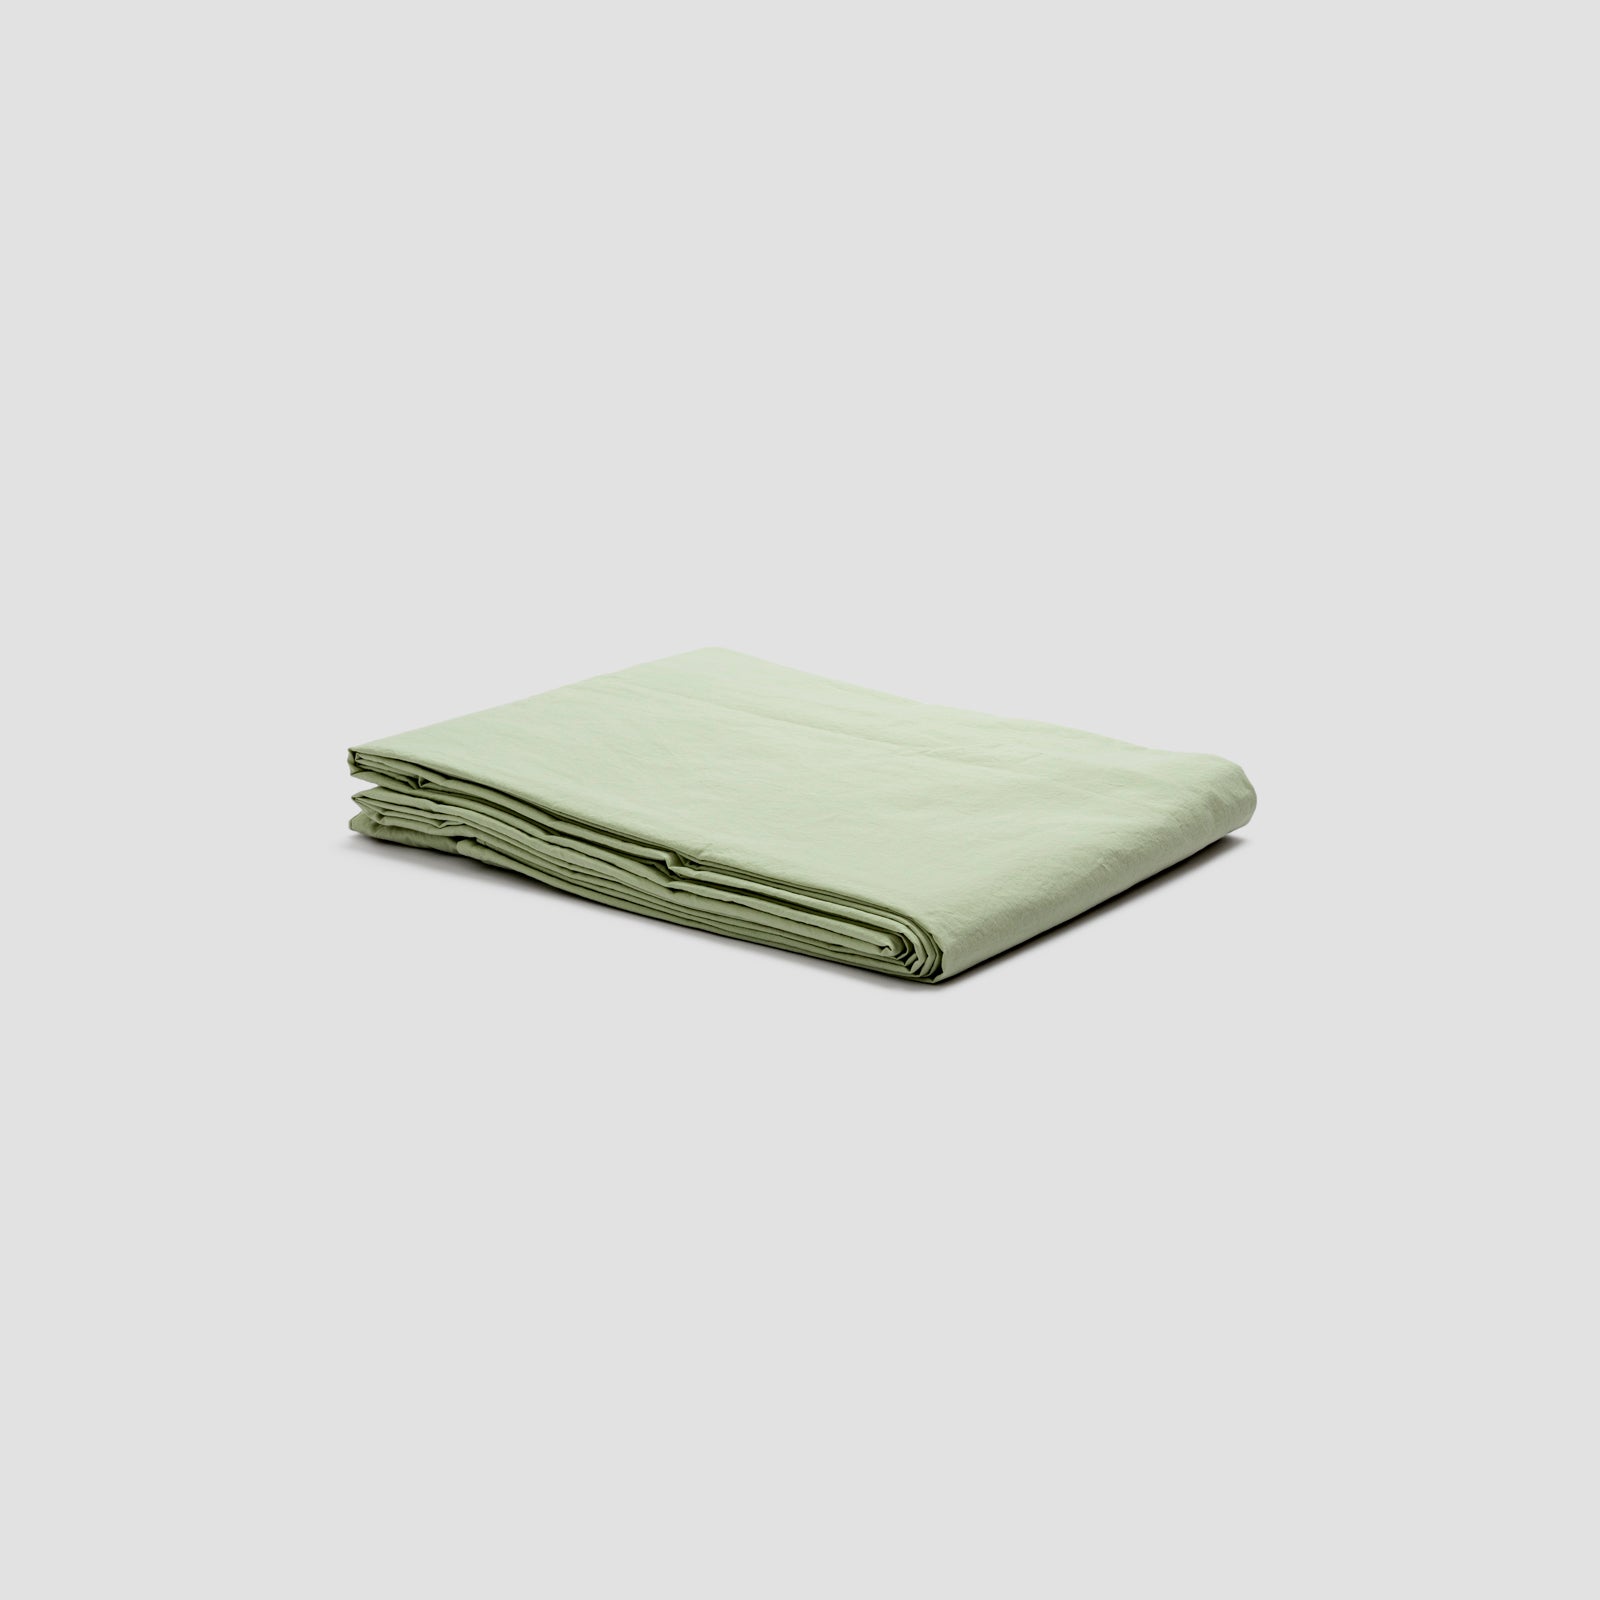 Apple Washed Cotton Percale Flat Sheet - Piglet in Bed